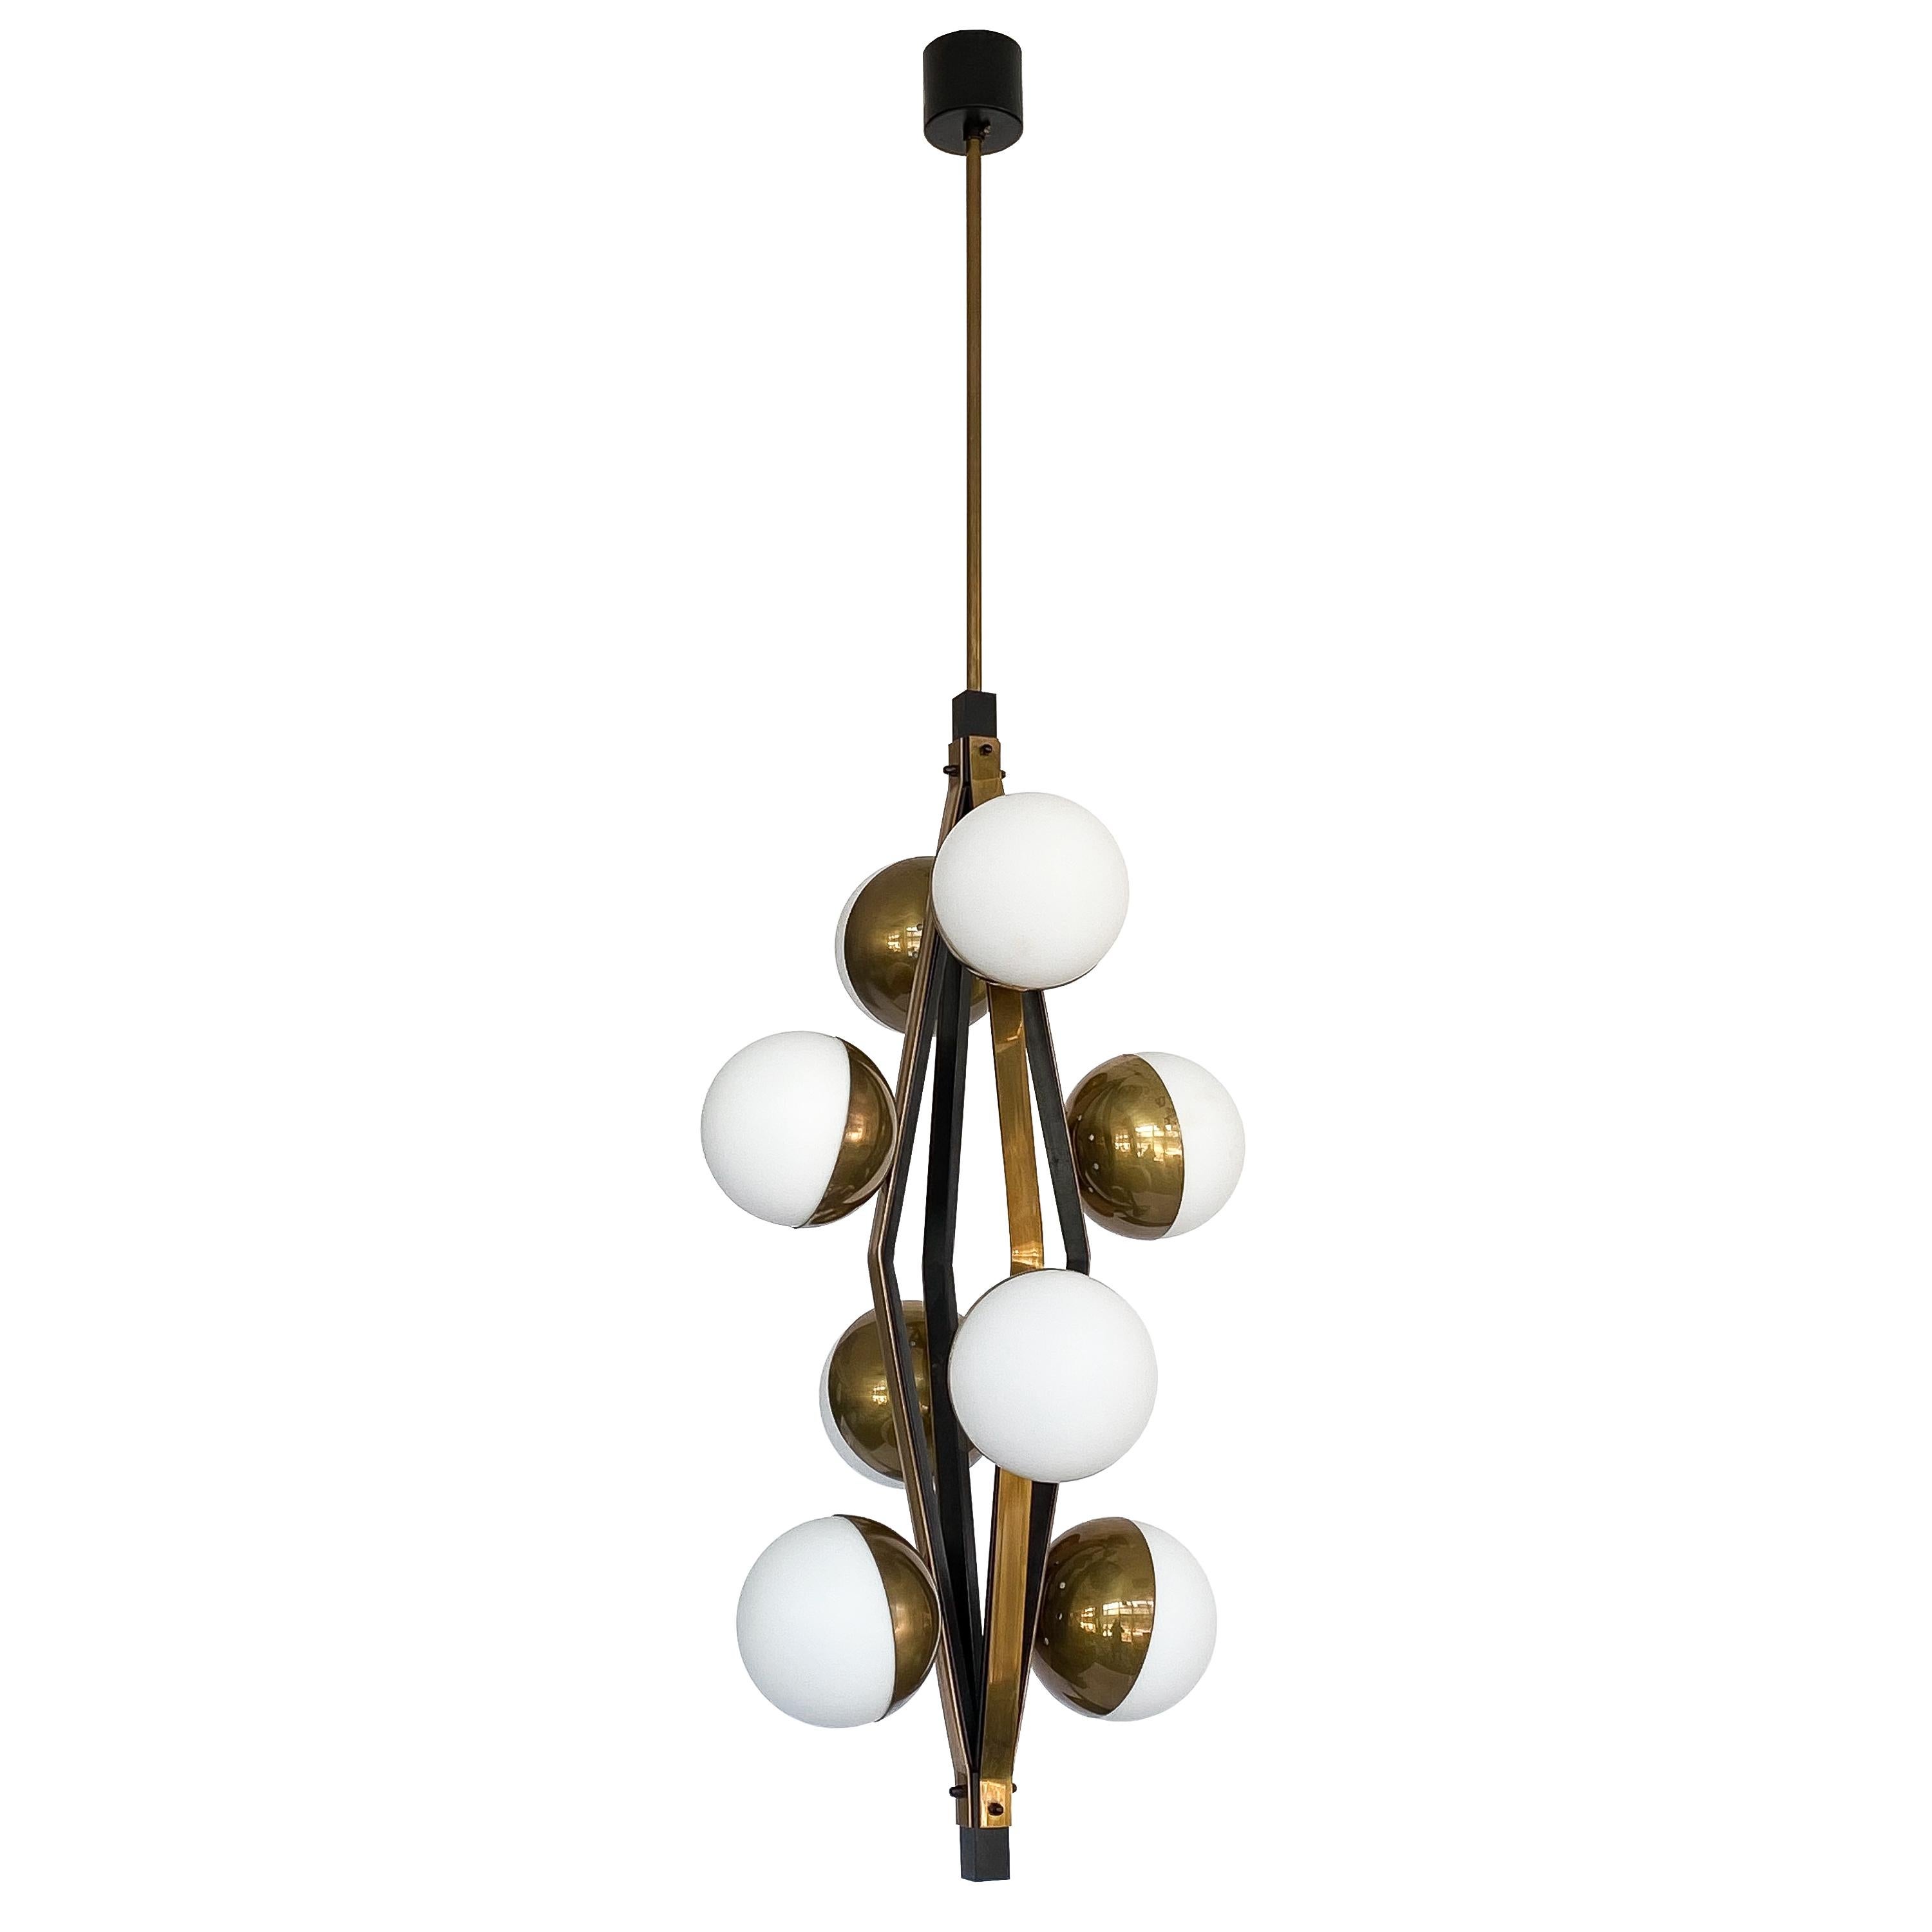 Stilnovo patinated brass pendant chandeliers with eight satin oplaine glass globes, Italy, circa 1950s. Priced individually. These Italian chandeliers feature a geometric diamond shaped open framework in blackened iron and beautifully patinated